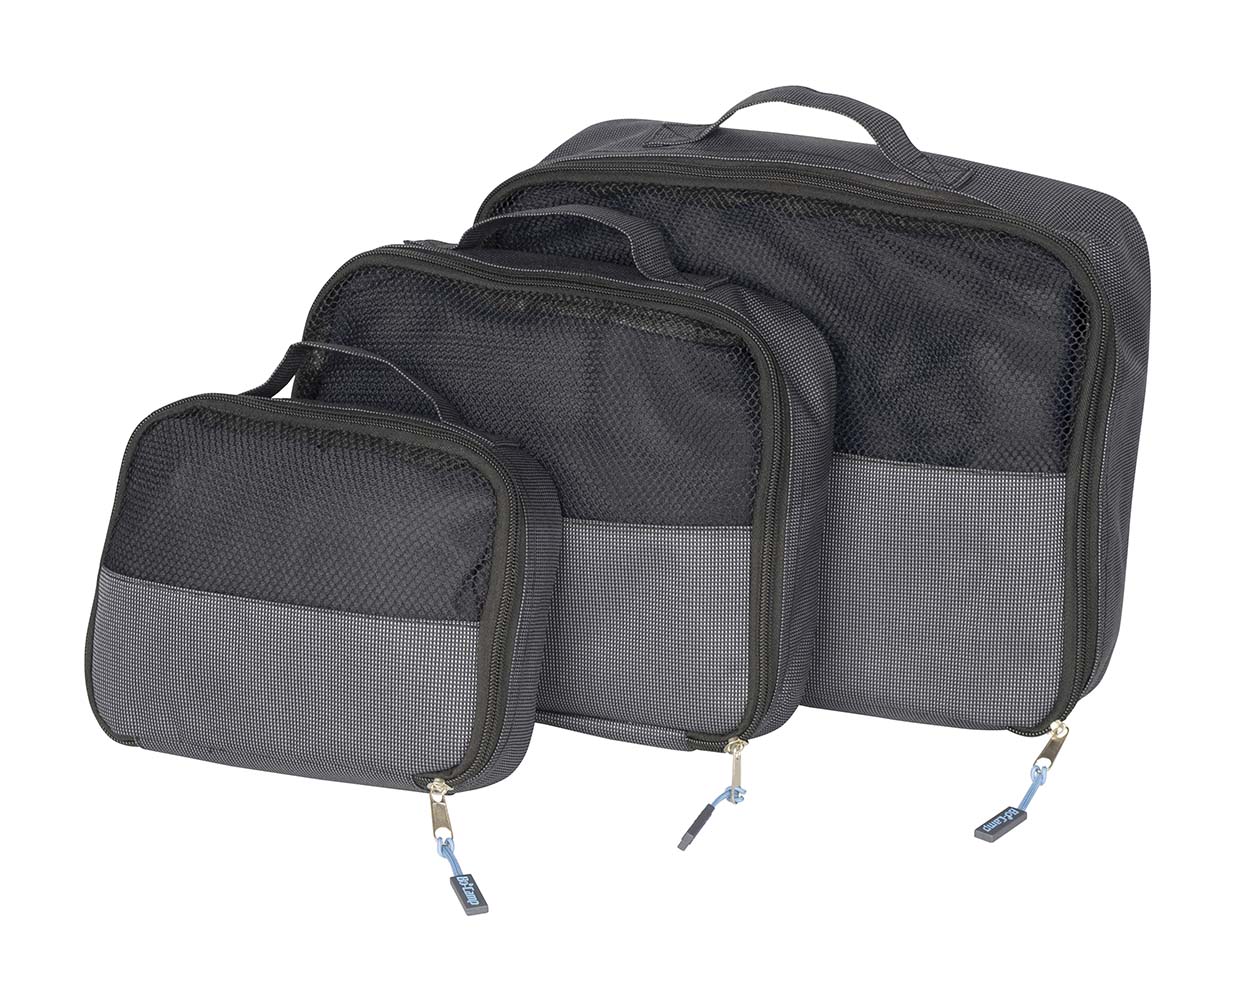 7504370 Handy travel pack cube set in 3 different sizes. Ideal for organizing stuff, organizing your suitcase or dirty or clean laundry. The bags have a mesh front and close with a zipper.